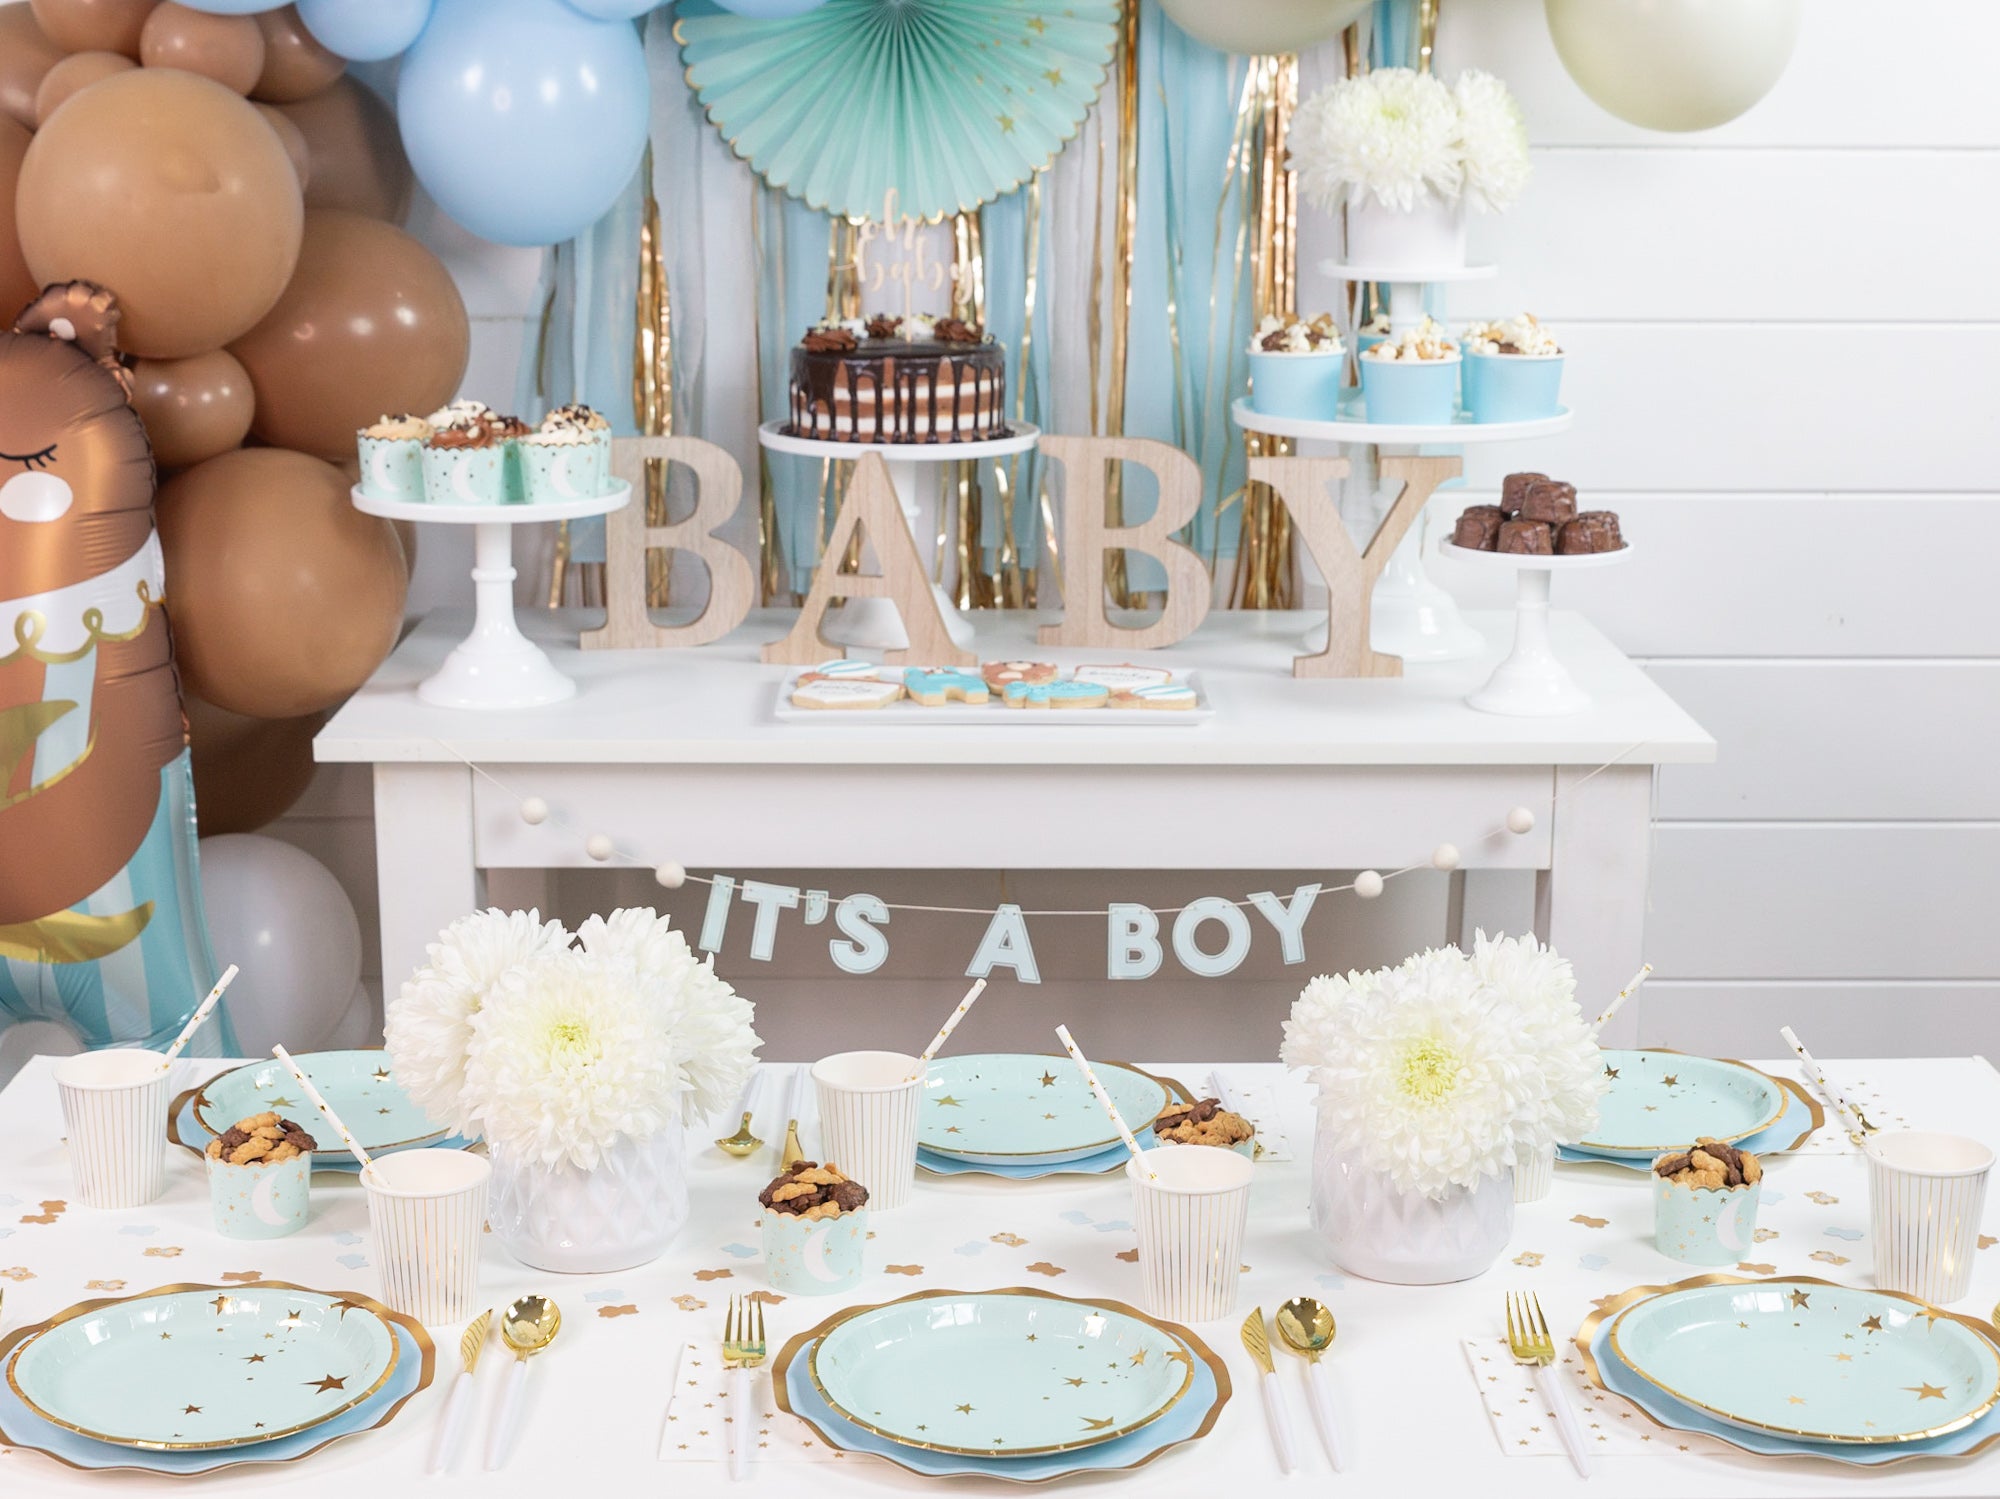 We Can Bearly Wait Teddy Bear Baby Shower Decoration Ideas | The Party Darling